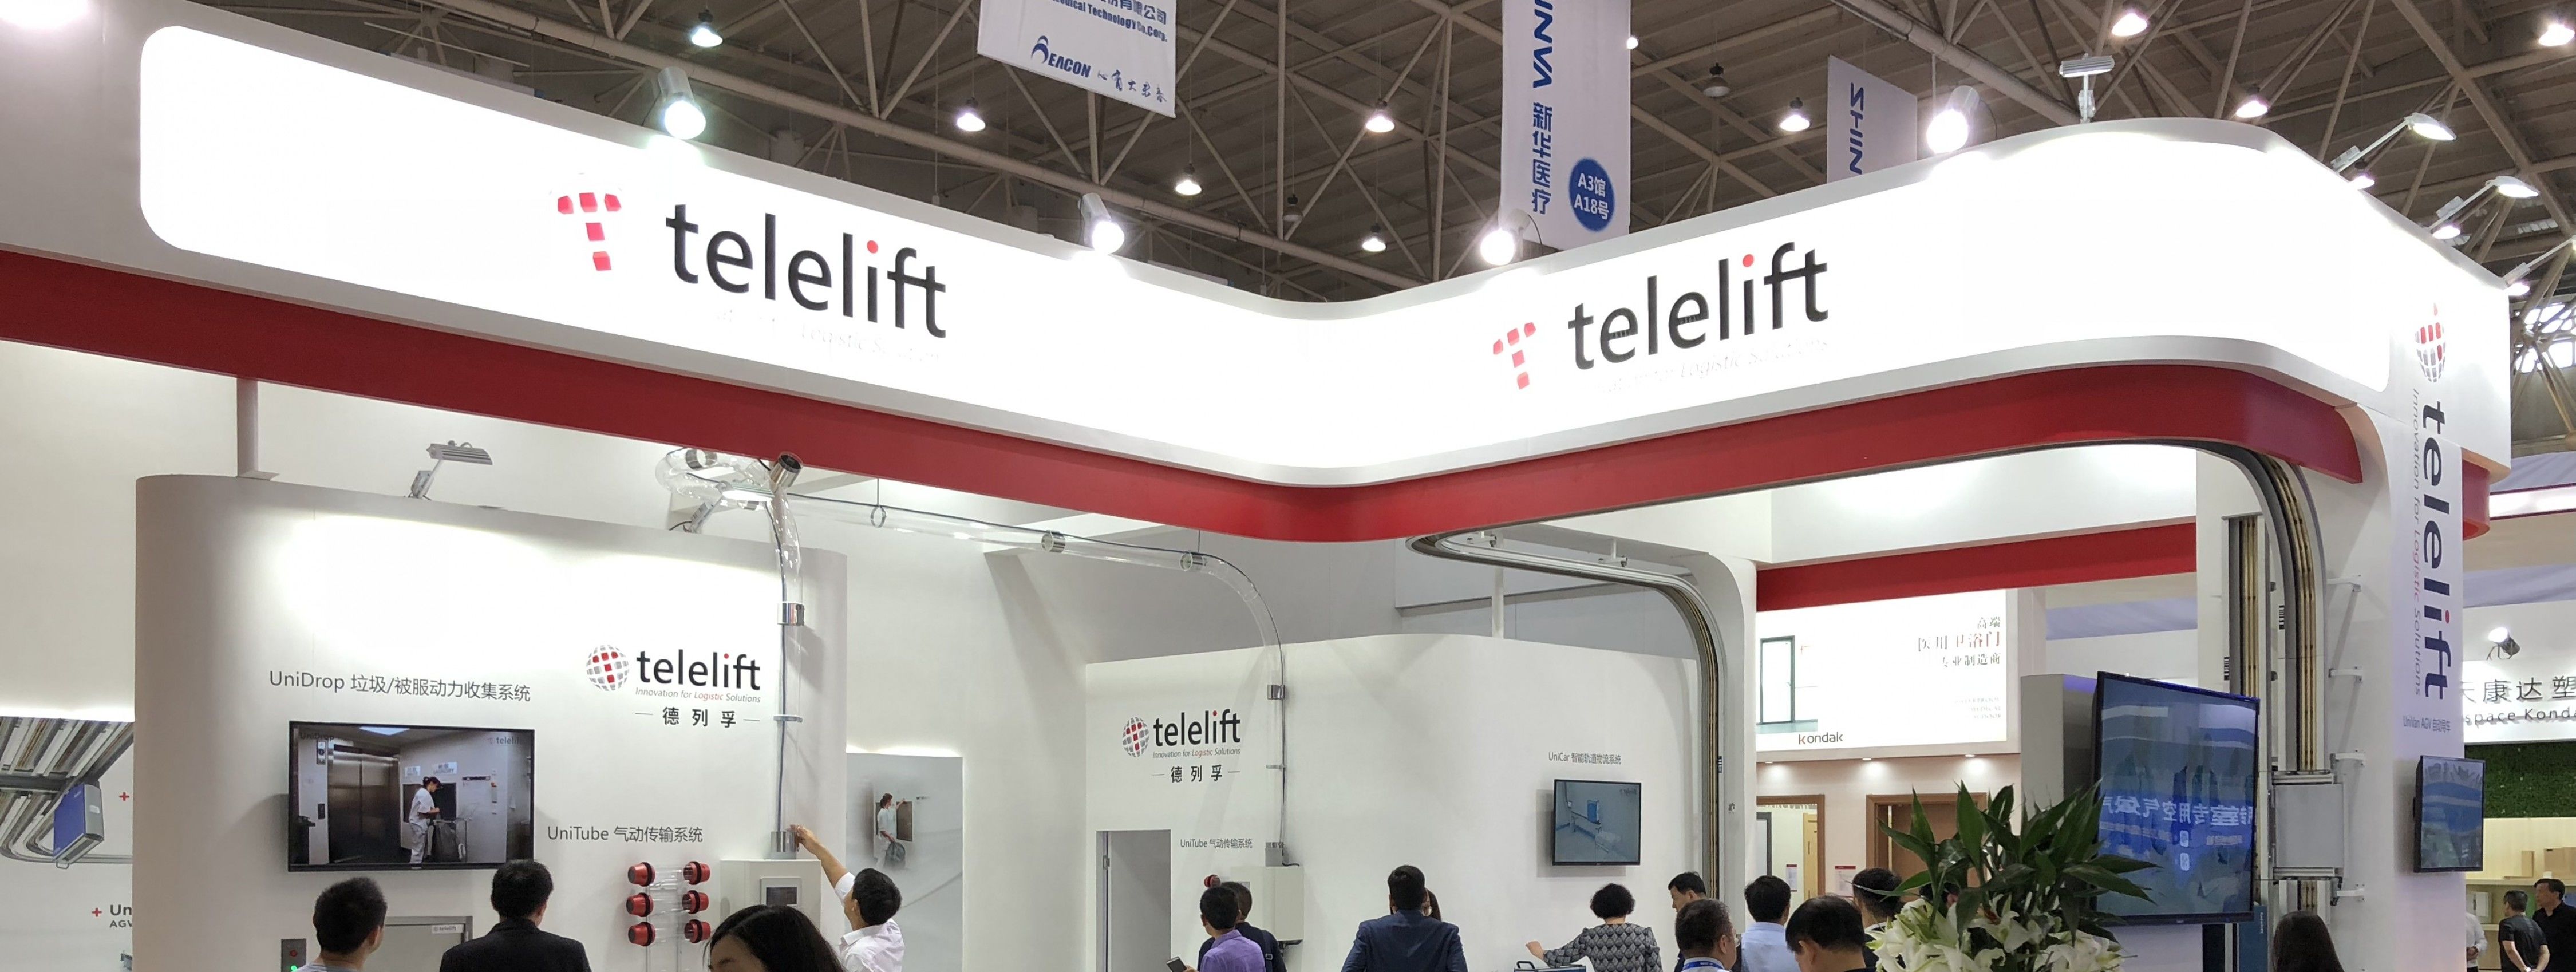 Telelift Events